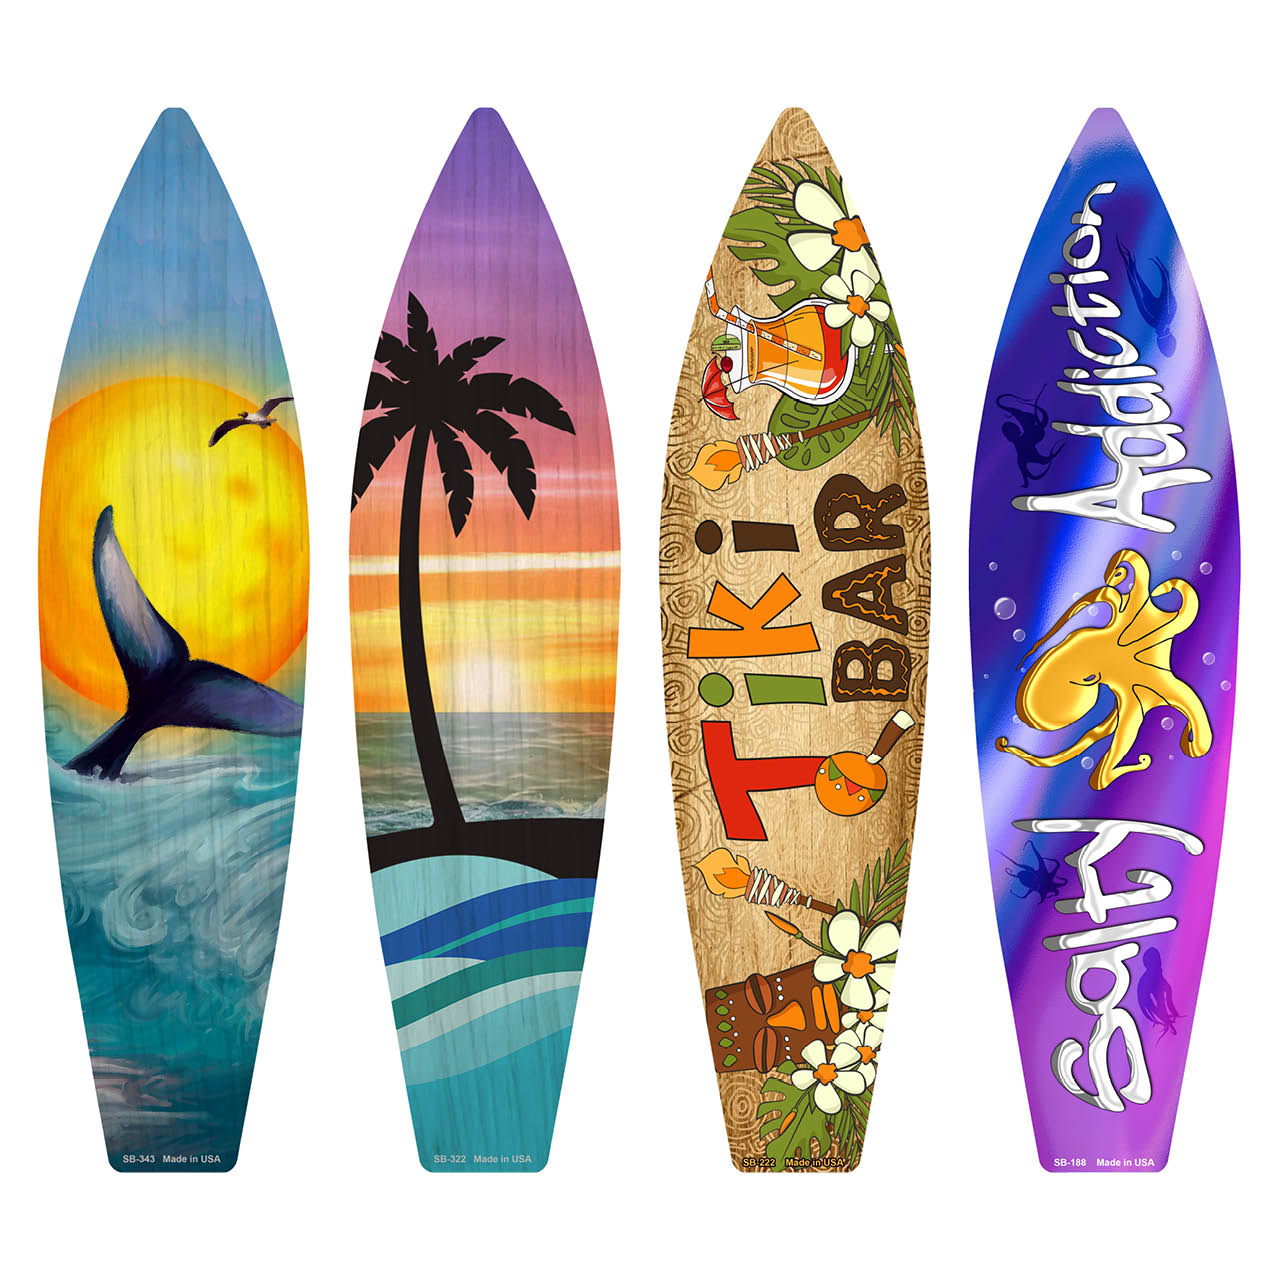 Beach Obsession Surfboard Set Wholesale Novelty Metal Set of 4 SB-Pack-08